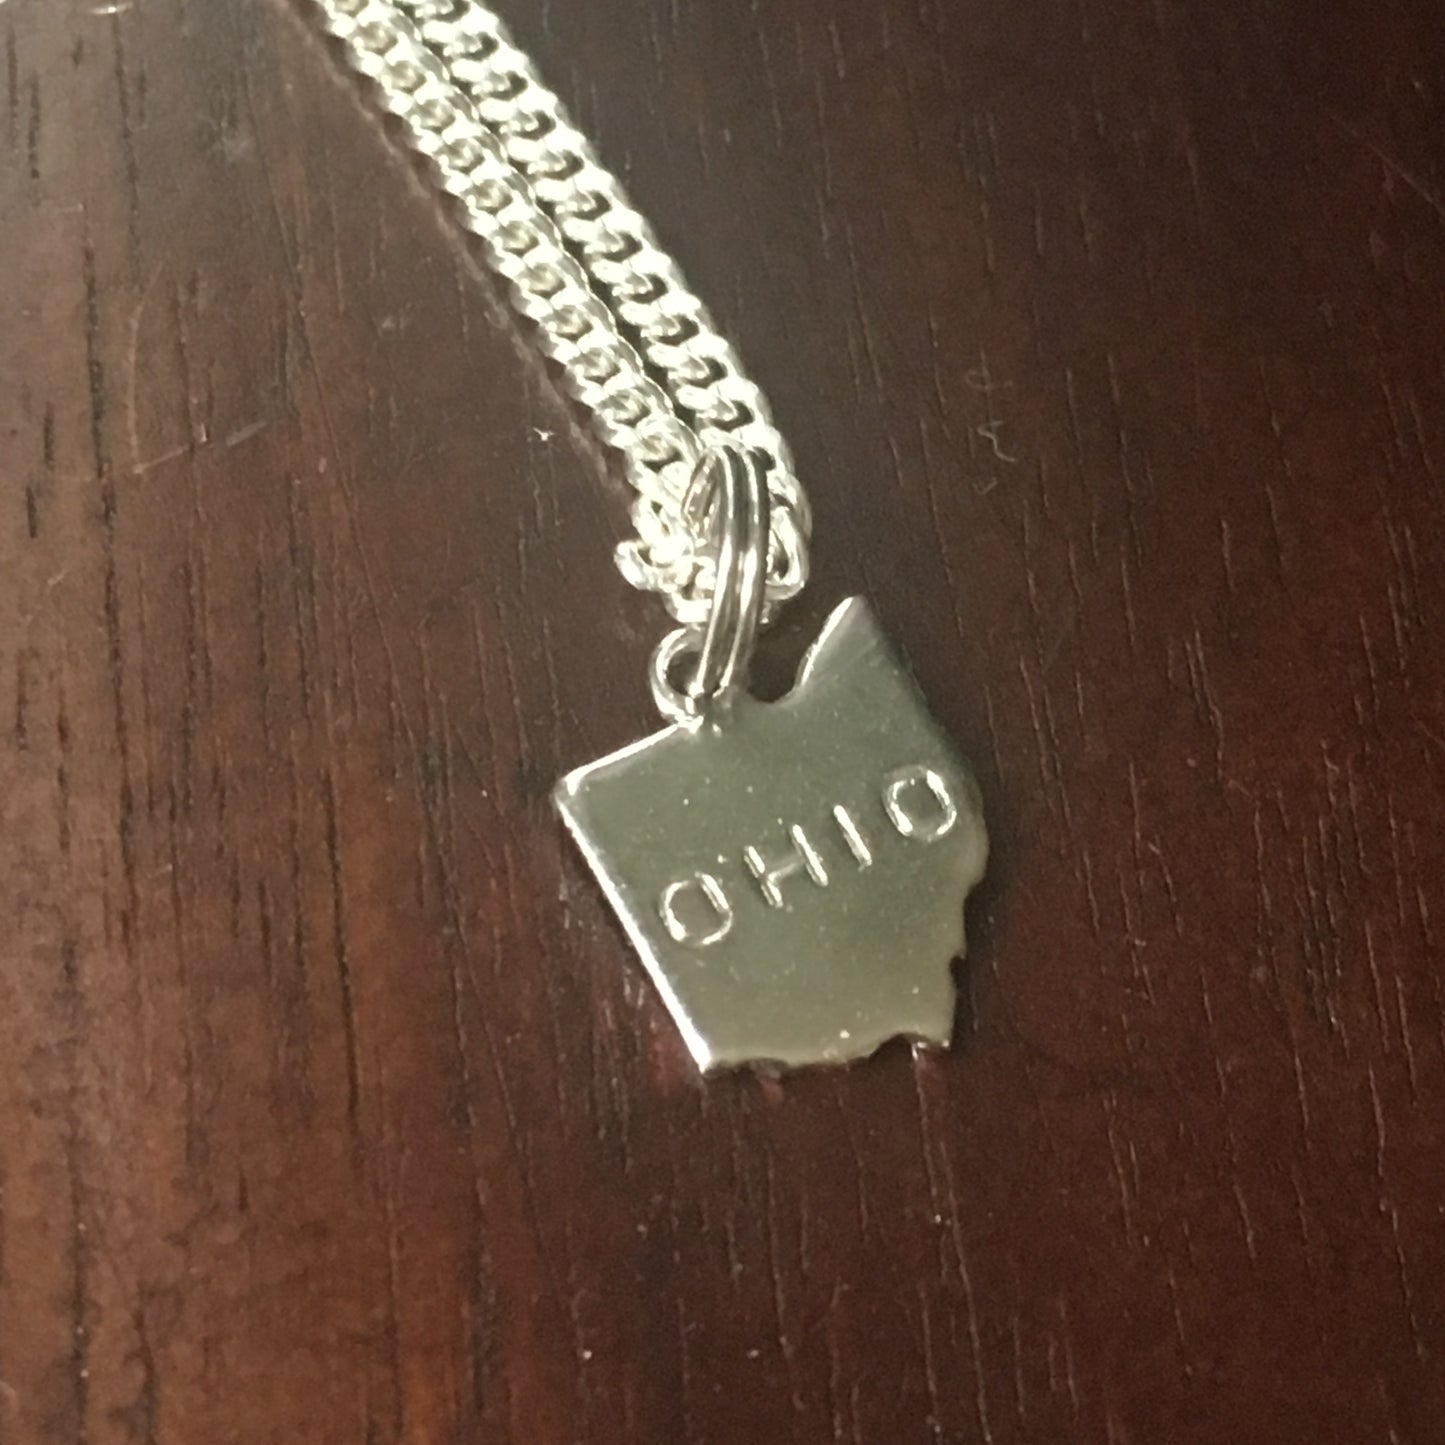 Silver Ohio stamped charm necklace